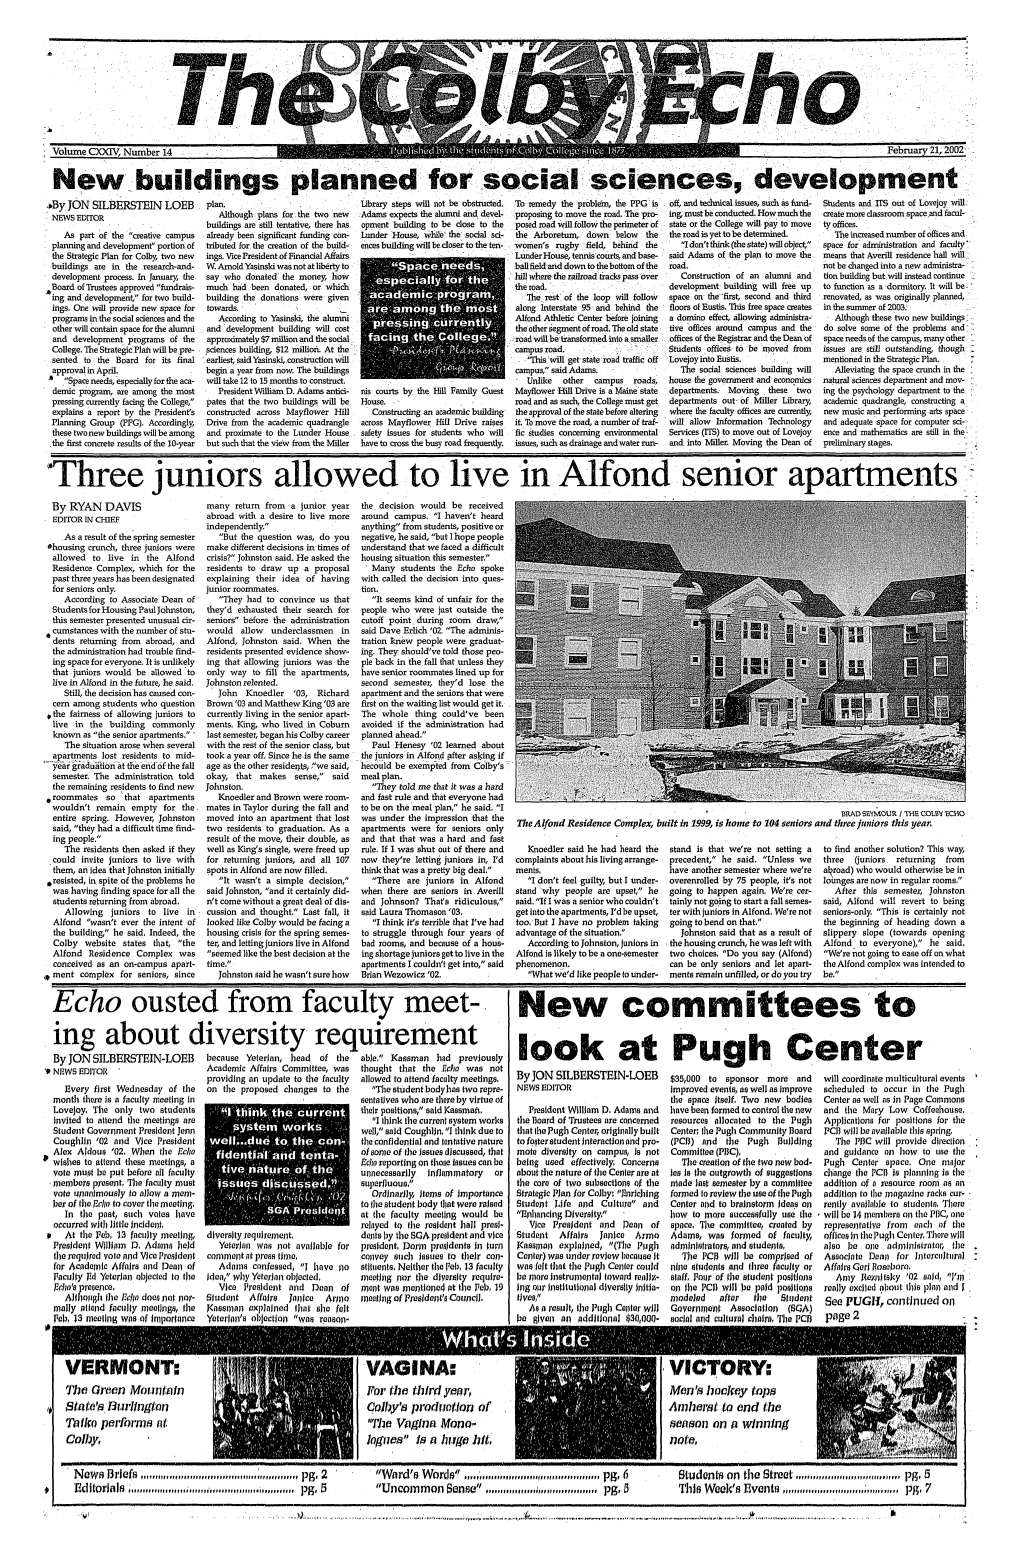 Three Juniors Allowed to Live in Alfond Senior Apartments